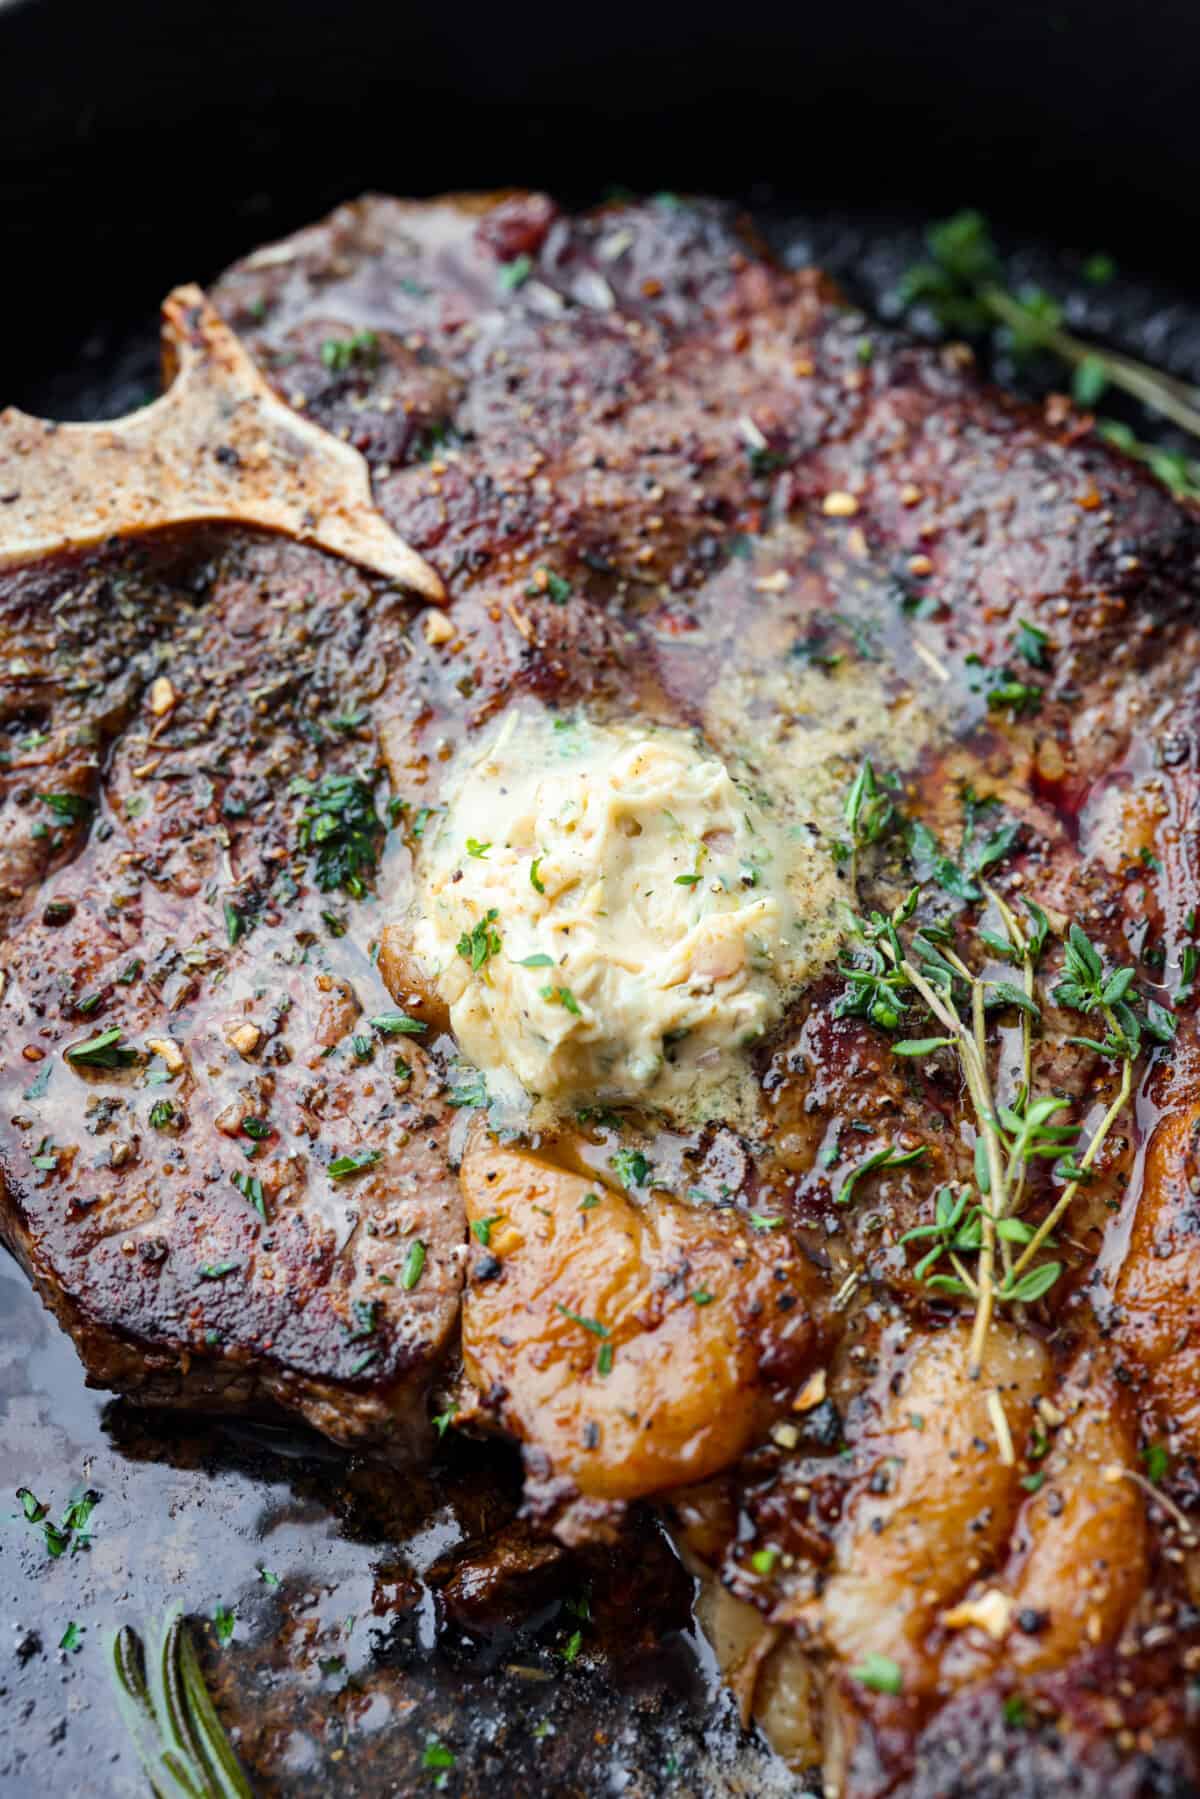 Close view of cowboy butter melting on top of a cooked steak garnished with fresh herbs.